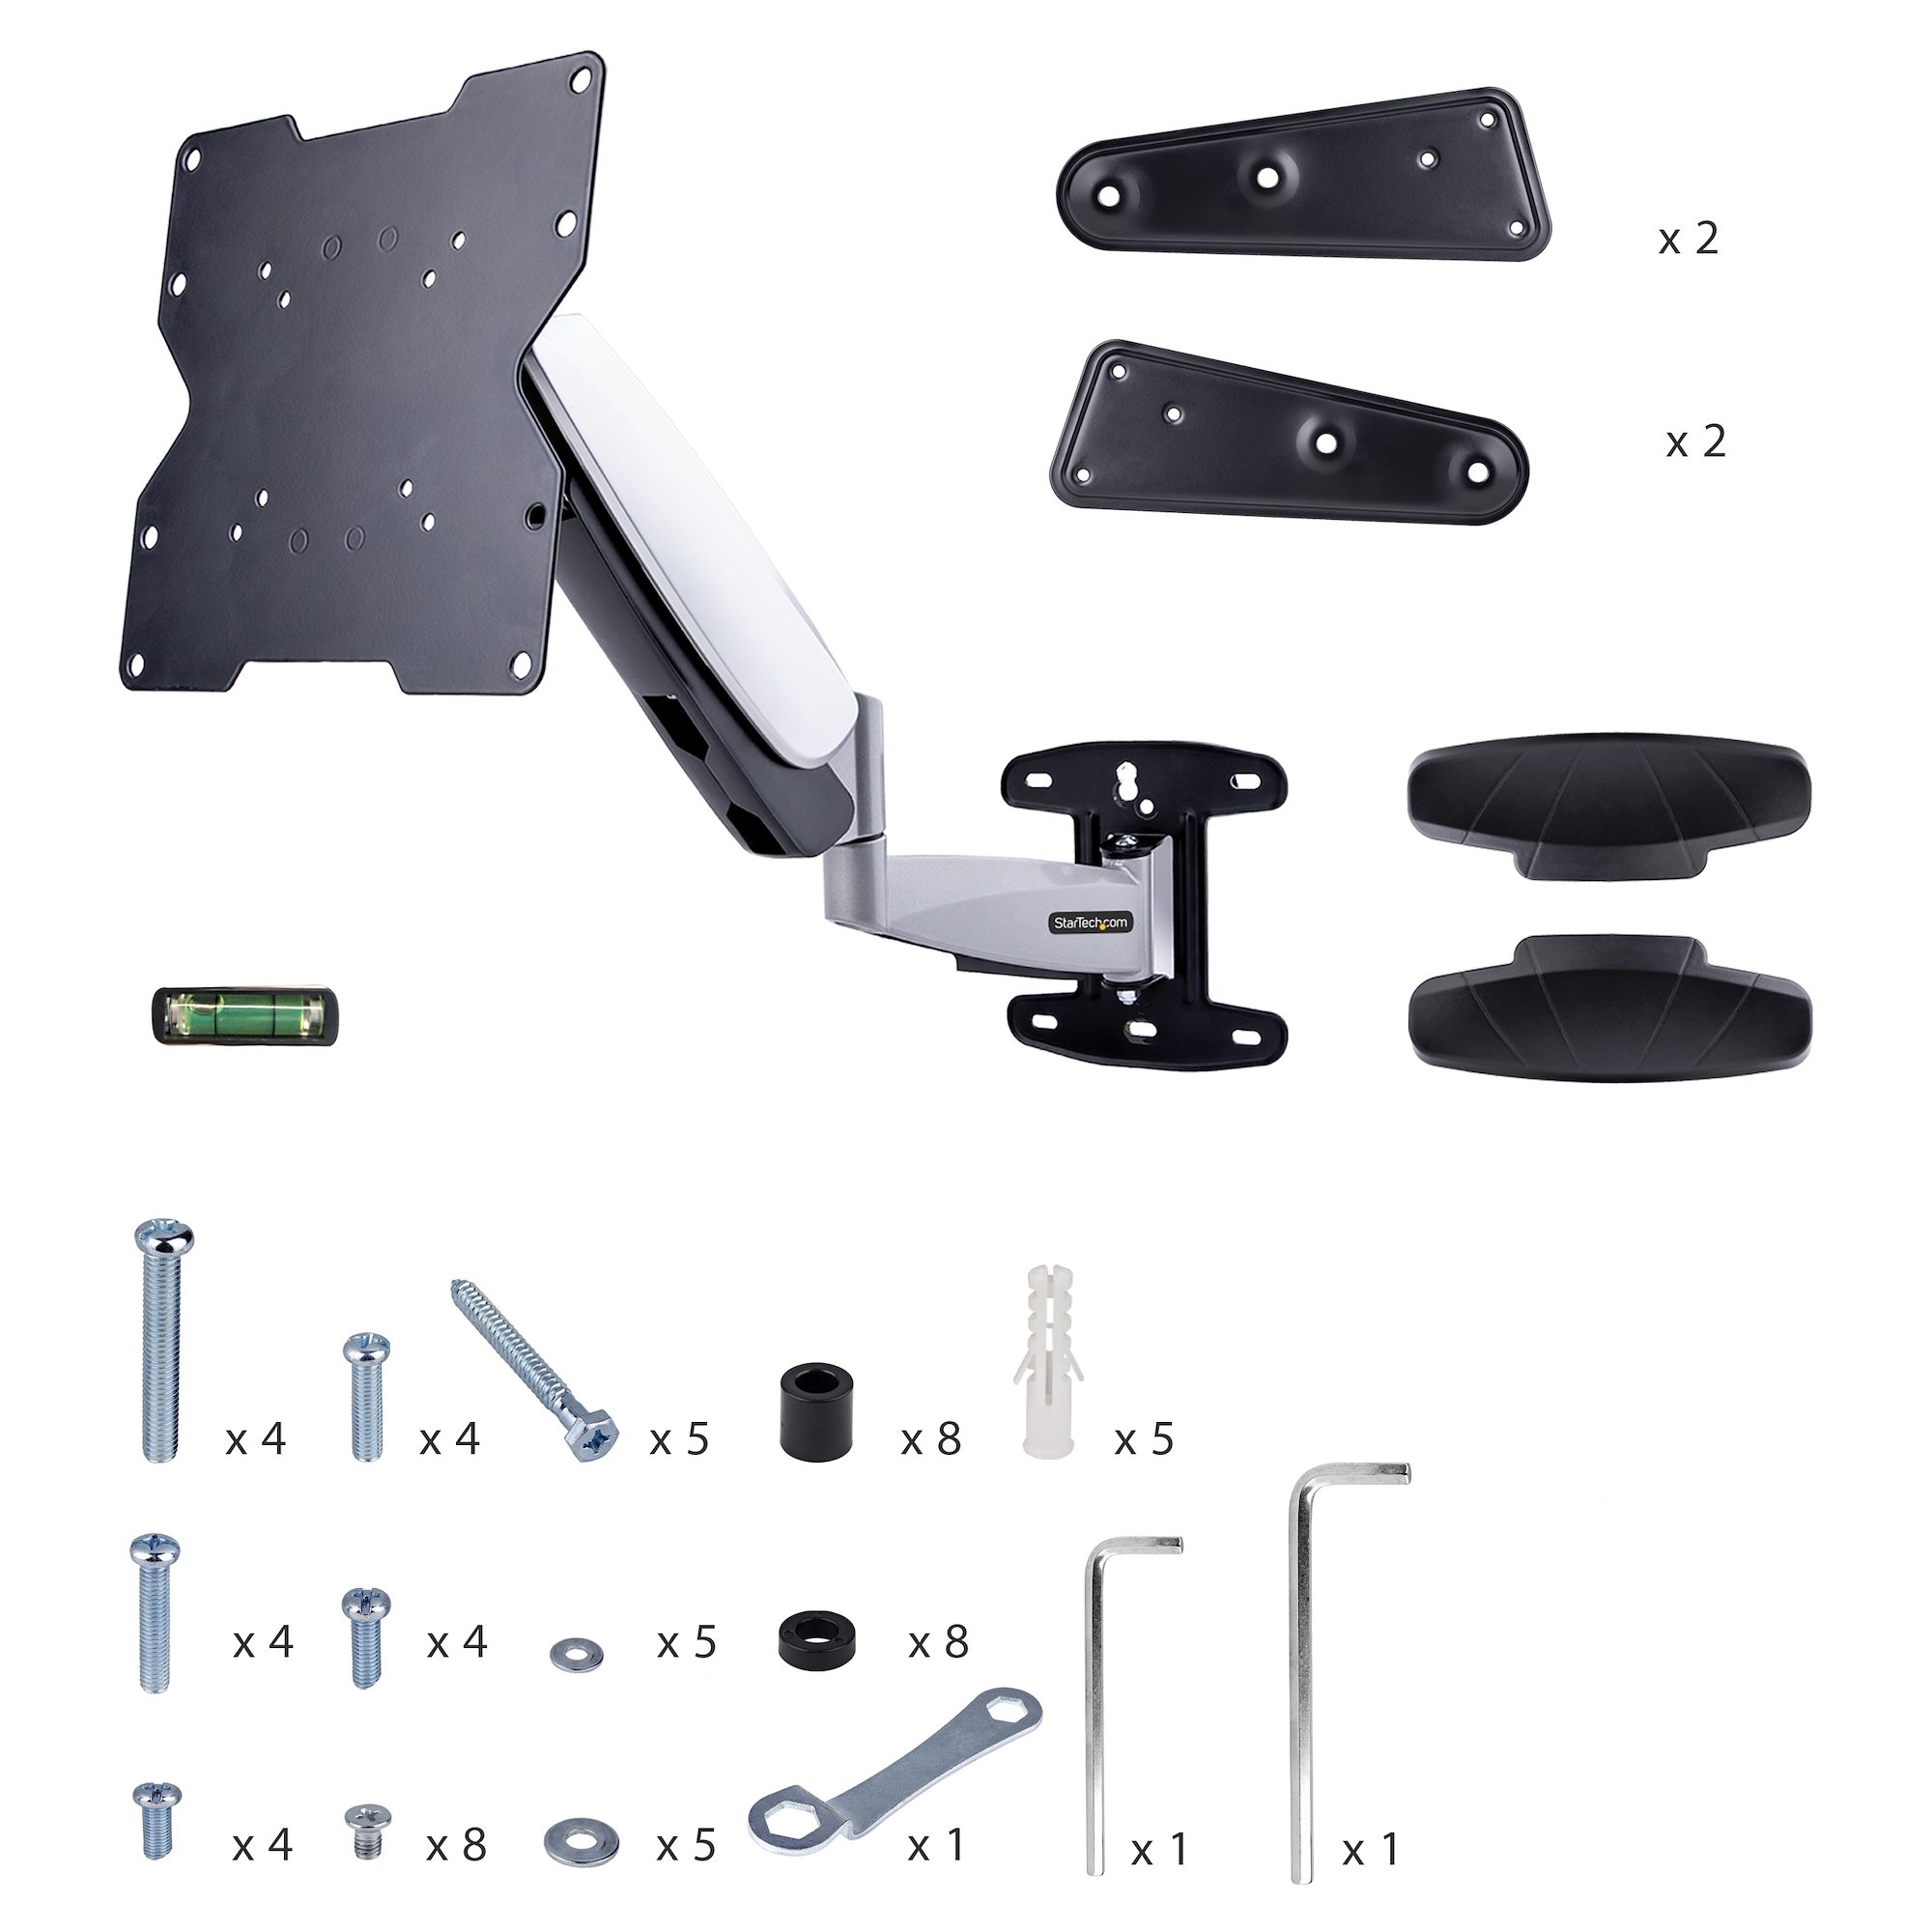  Mount-It! VESA Mount Adapter Plate - Monitor and TV Mount  Extender Conversion Kit Allows 75x75, 100x100, 200x200 to Fit Up to 400x200  mm Patterns, Heavy-Gauge Steel, Hardware Included : Electronics